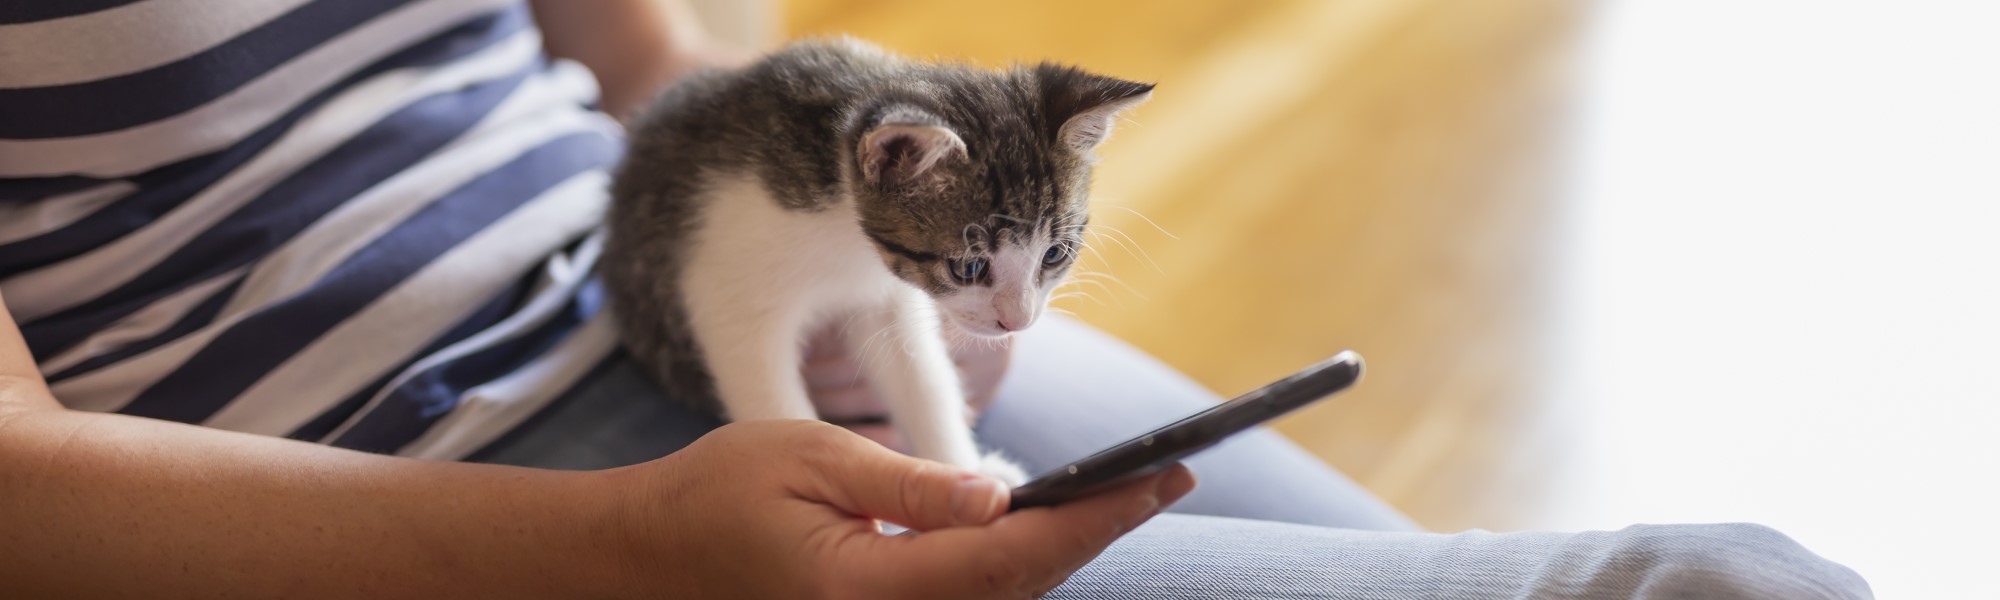 Woman using smartphone and holding kitten [1167784776]_banner